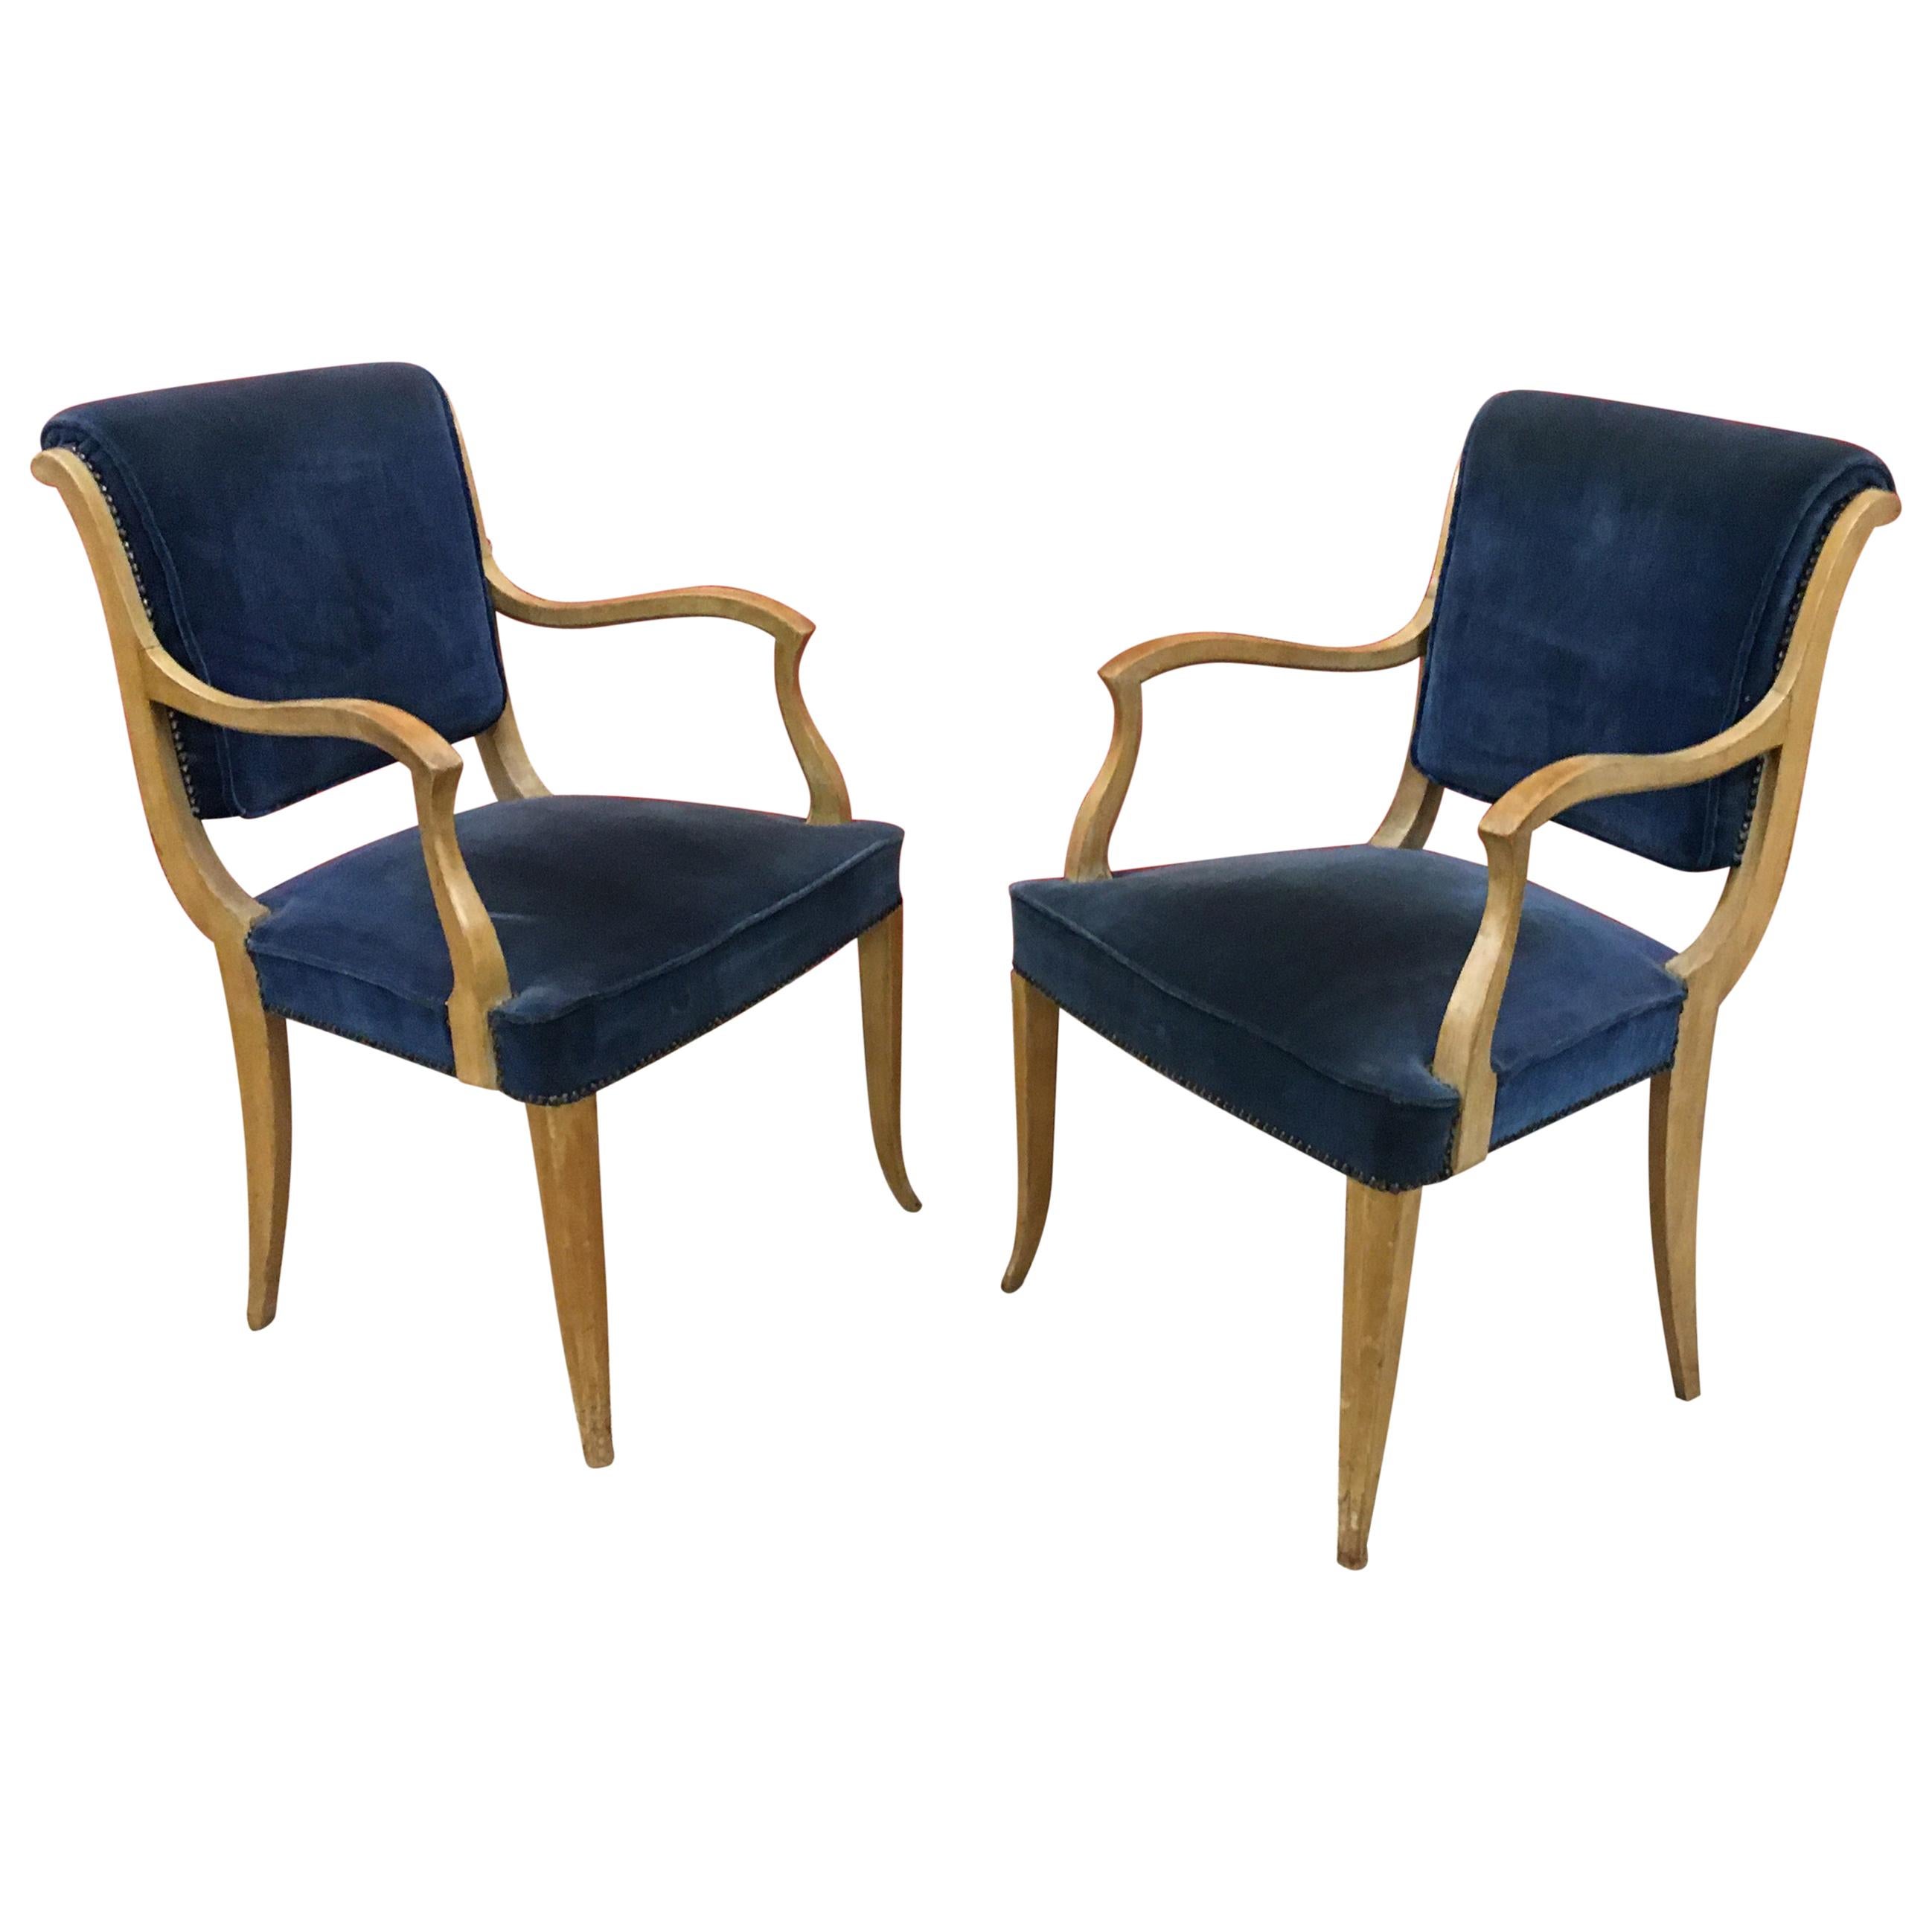 René Prou, Two Art Deco Armchairs in Lacquered Wood and Blue Velvet